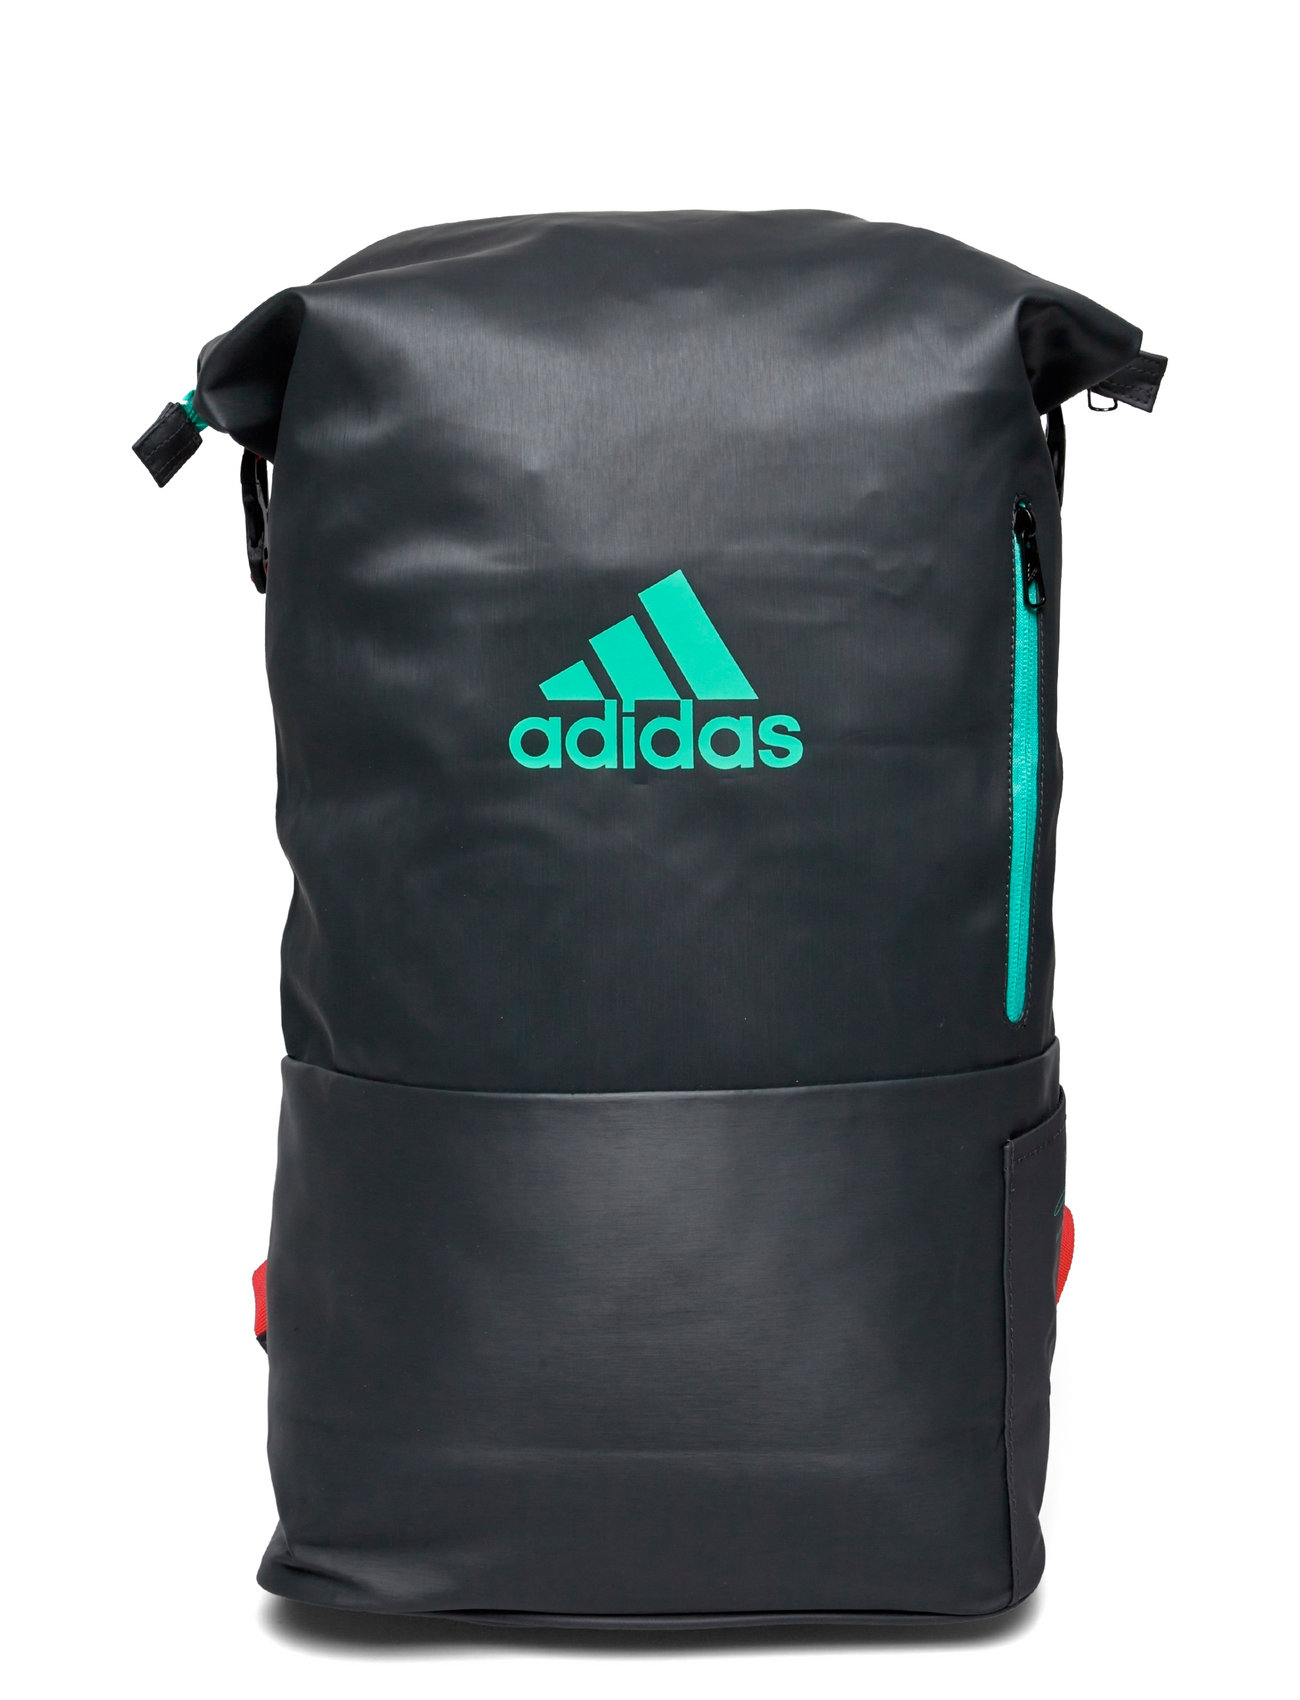 Backpack Multigame Sport Sports Equipment Rackets & Equipment Racketsports Bags Black Adidas Performance